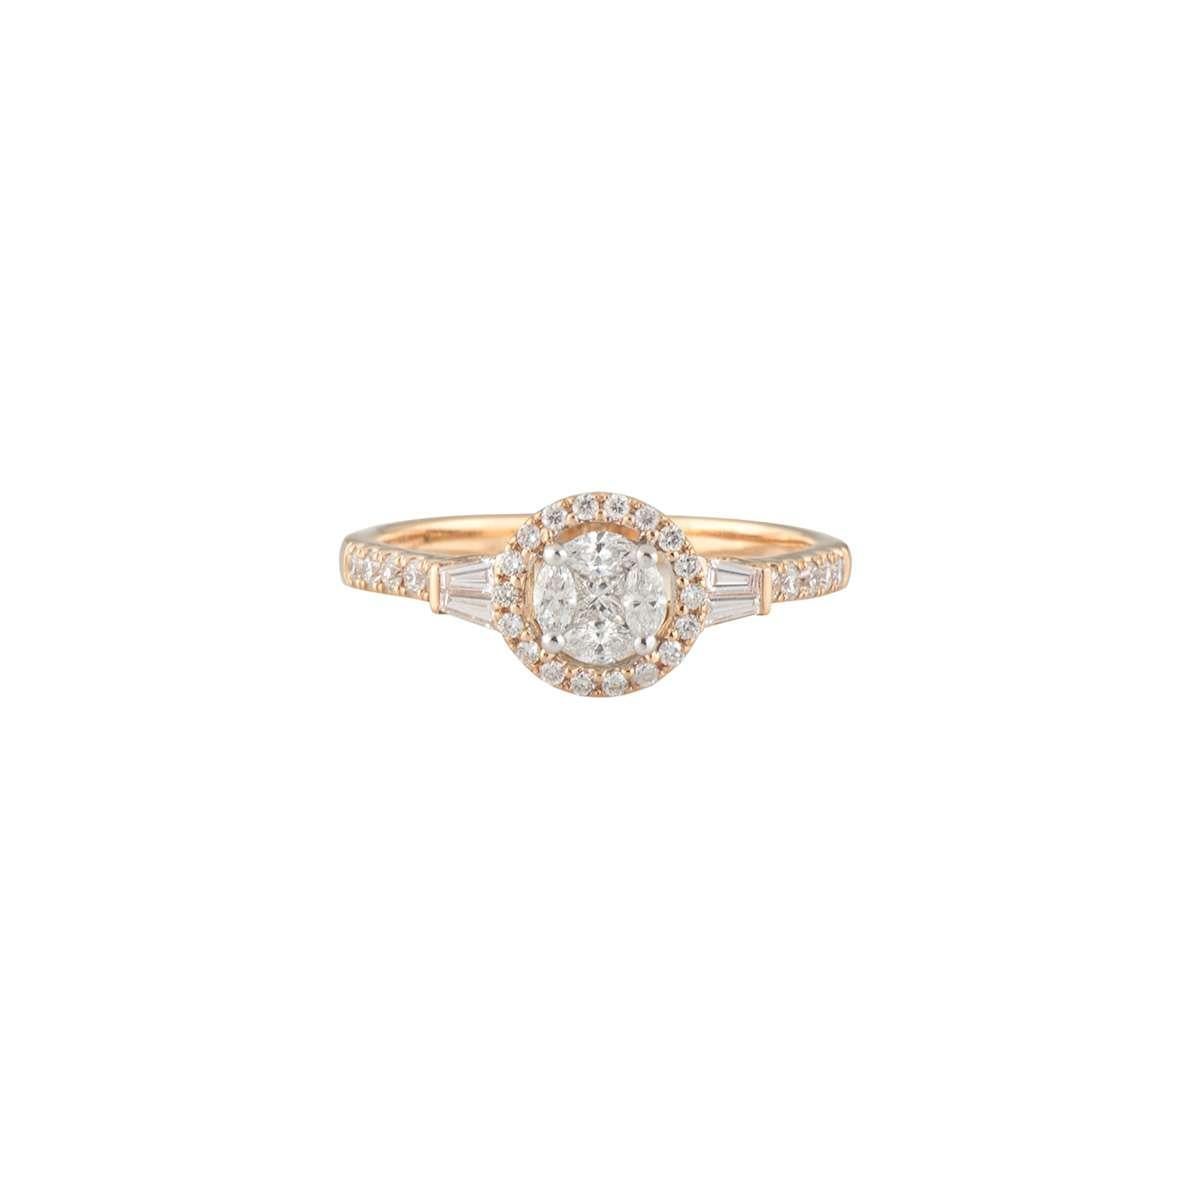 A sparkly 18k rose gold diamond ring. The ring comprises of 4 marquise cut diamonds set in a circle with a princess cut diamond set in the middle, creating an illusion of a round diamond. Complementing the centre are a halo of round brilliant cut